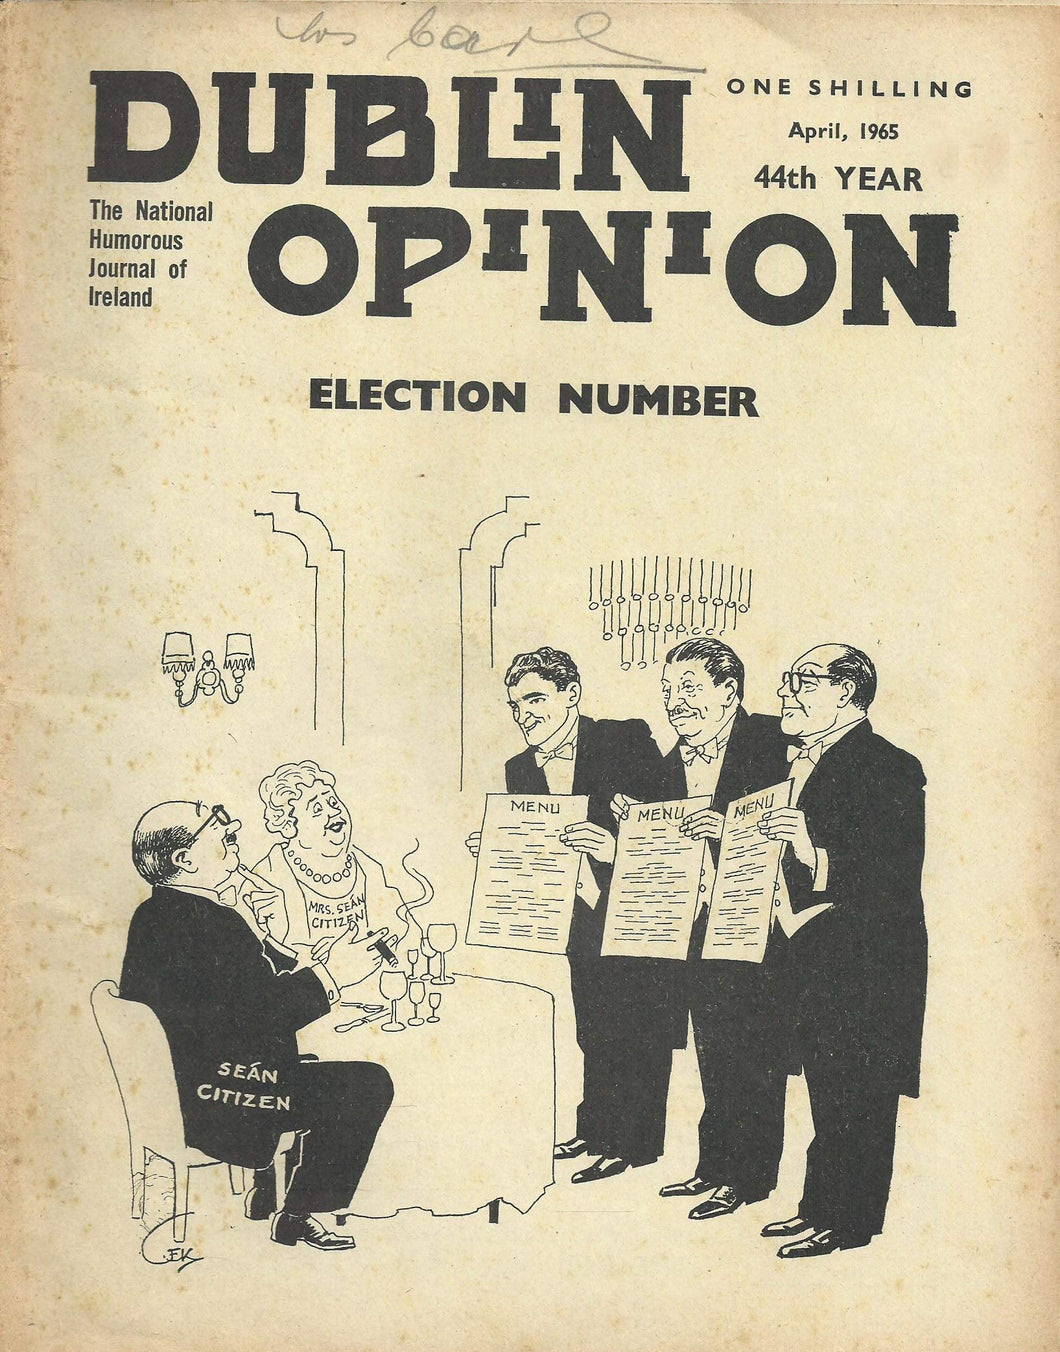 Dublin Opinion - April, 1965 - The National Humorous Journal of Ireland